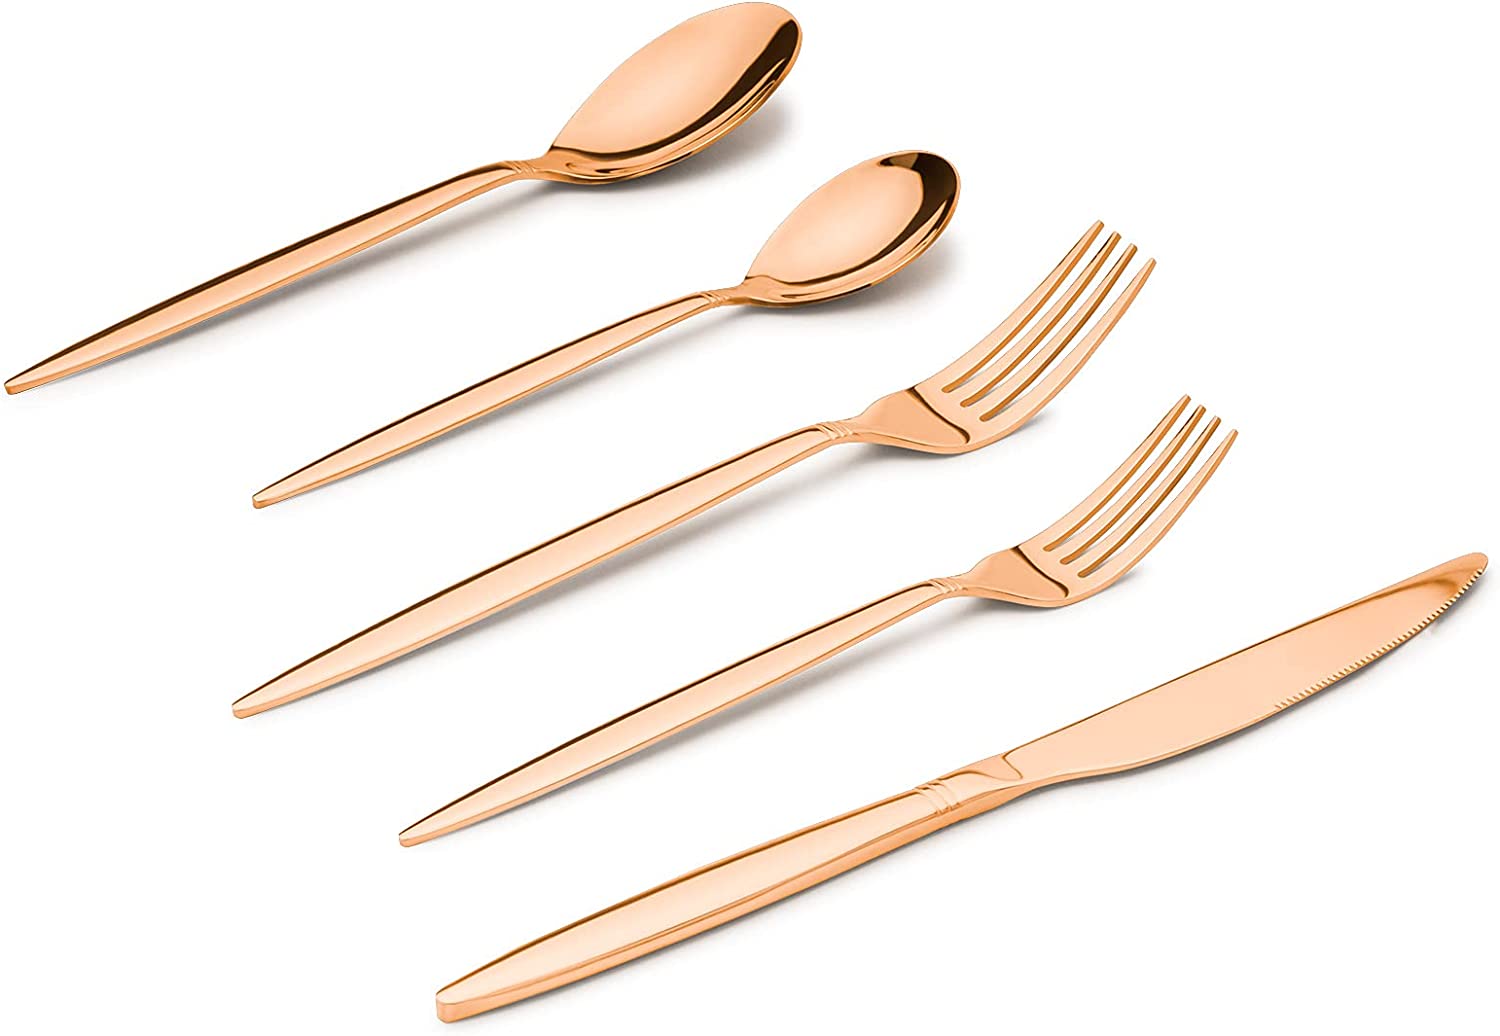 SANTUO 20 Piece Silverware Set for 4, Dinning Stainless Steel Flatware Set, 20pcs Lunch Tableware Cutlery Set, Dinner Mirror Polished Utensils, Include Knife Fork Spoon for Home (Rose Gold)